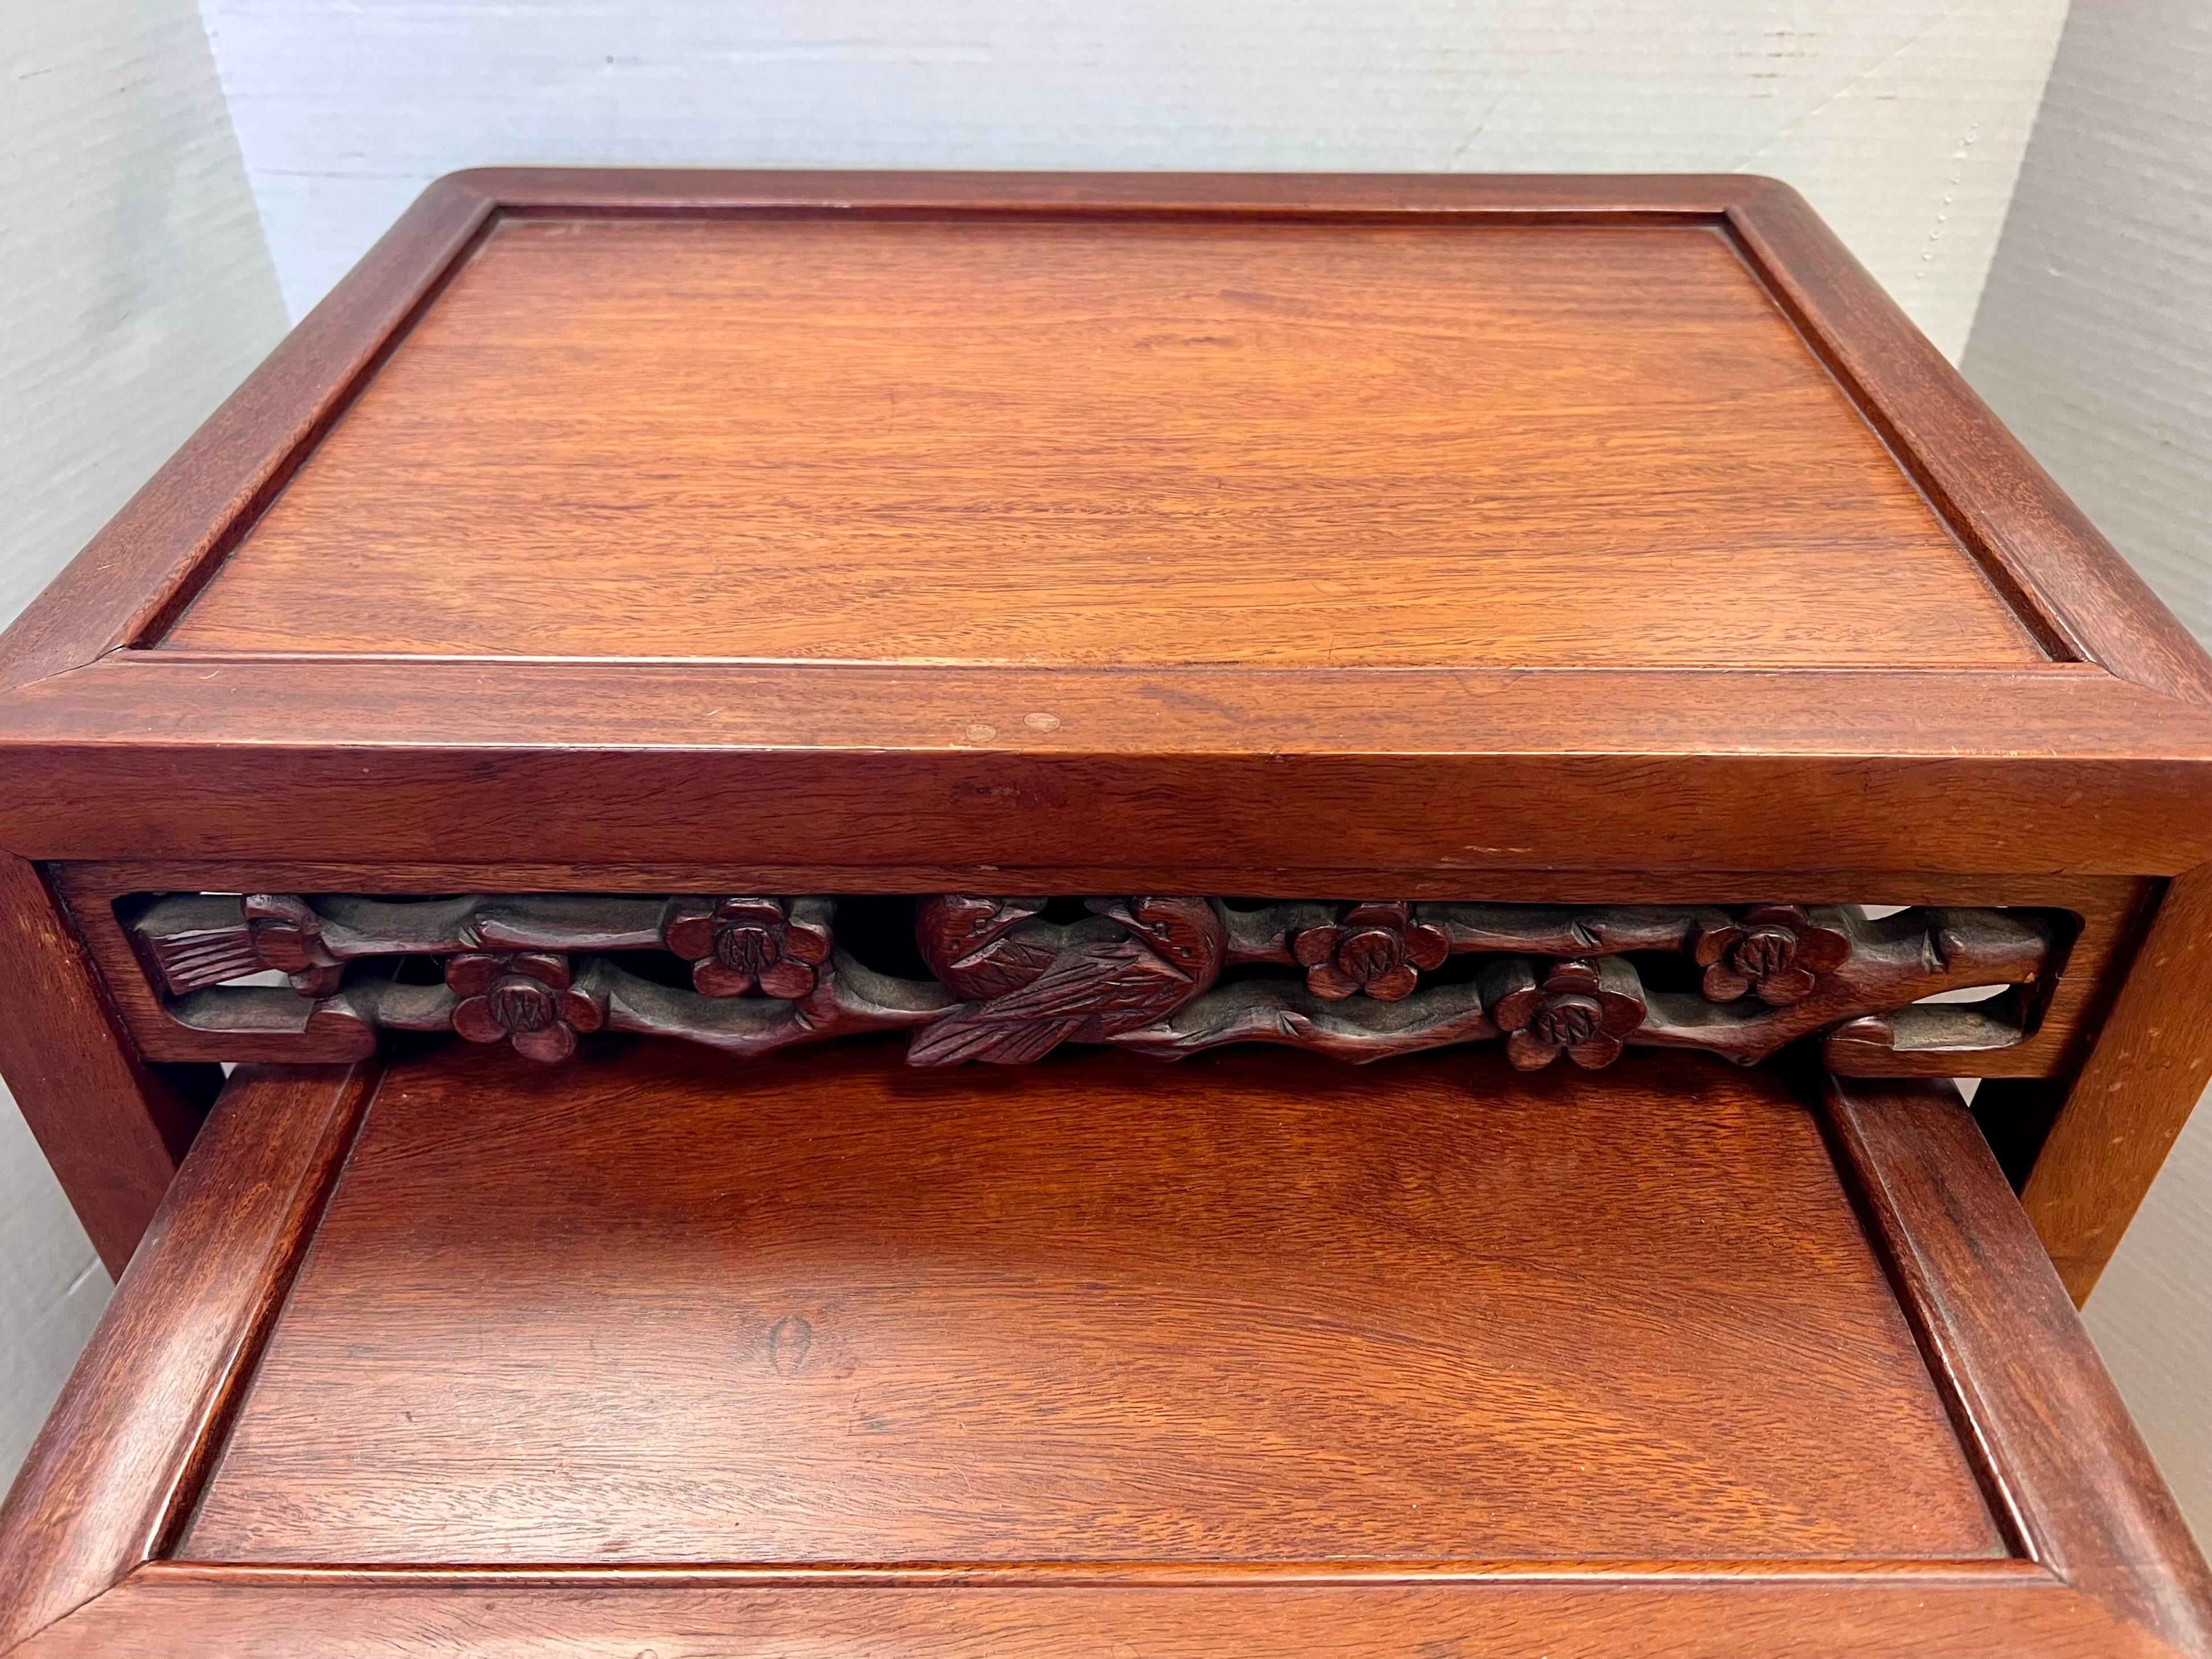 Set of 4 Chinese Asian Carved Nesting Tables Chinoiserie Mid-Century Modern In Good Condition For Sale In West Hartford, CT